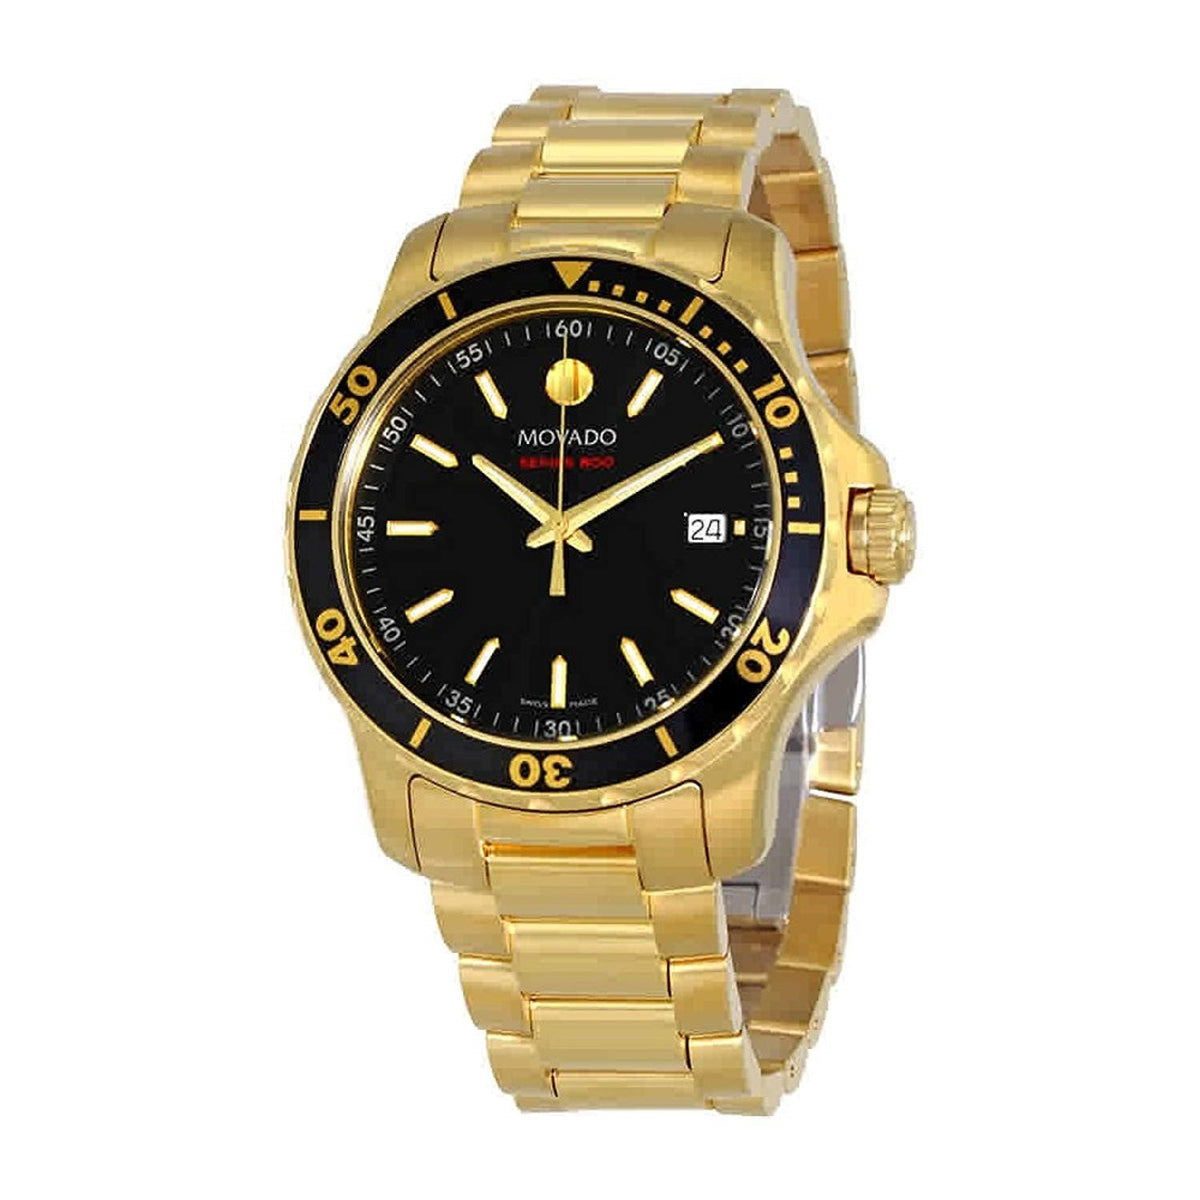 Stainless Series — Gold-Tone Watch 800 Steel 2600145 Movado Quartz